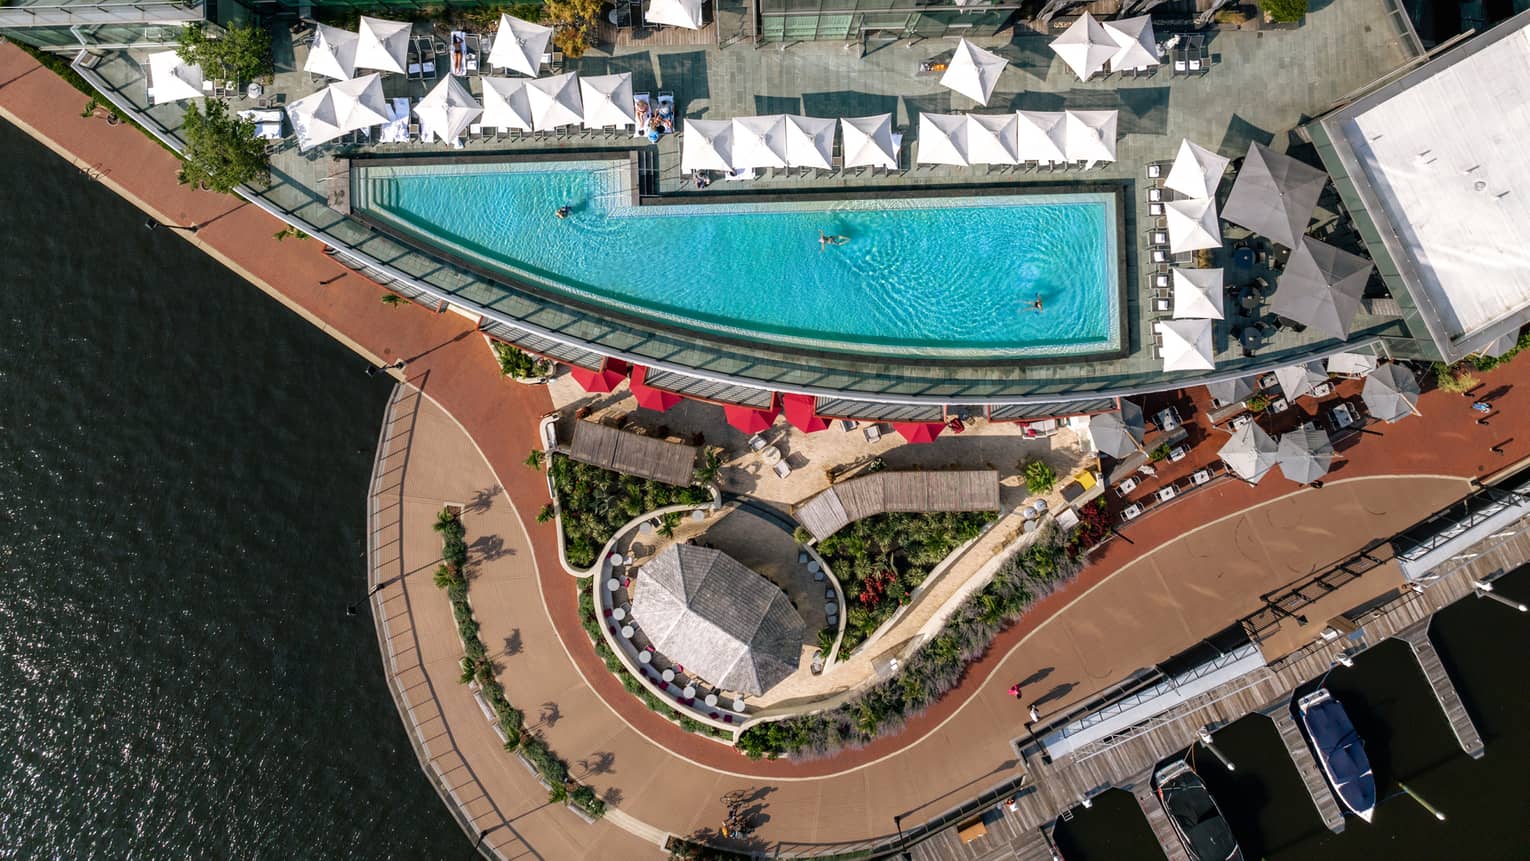 Aerial view of a rooftop pool with cabanas.